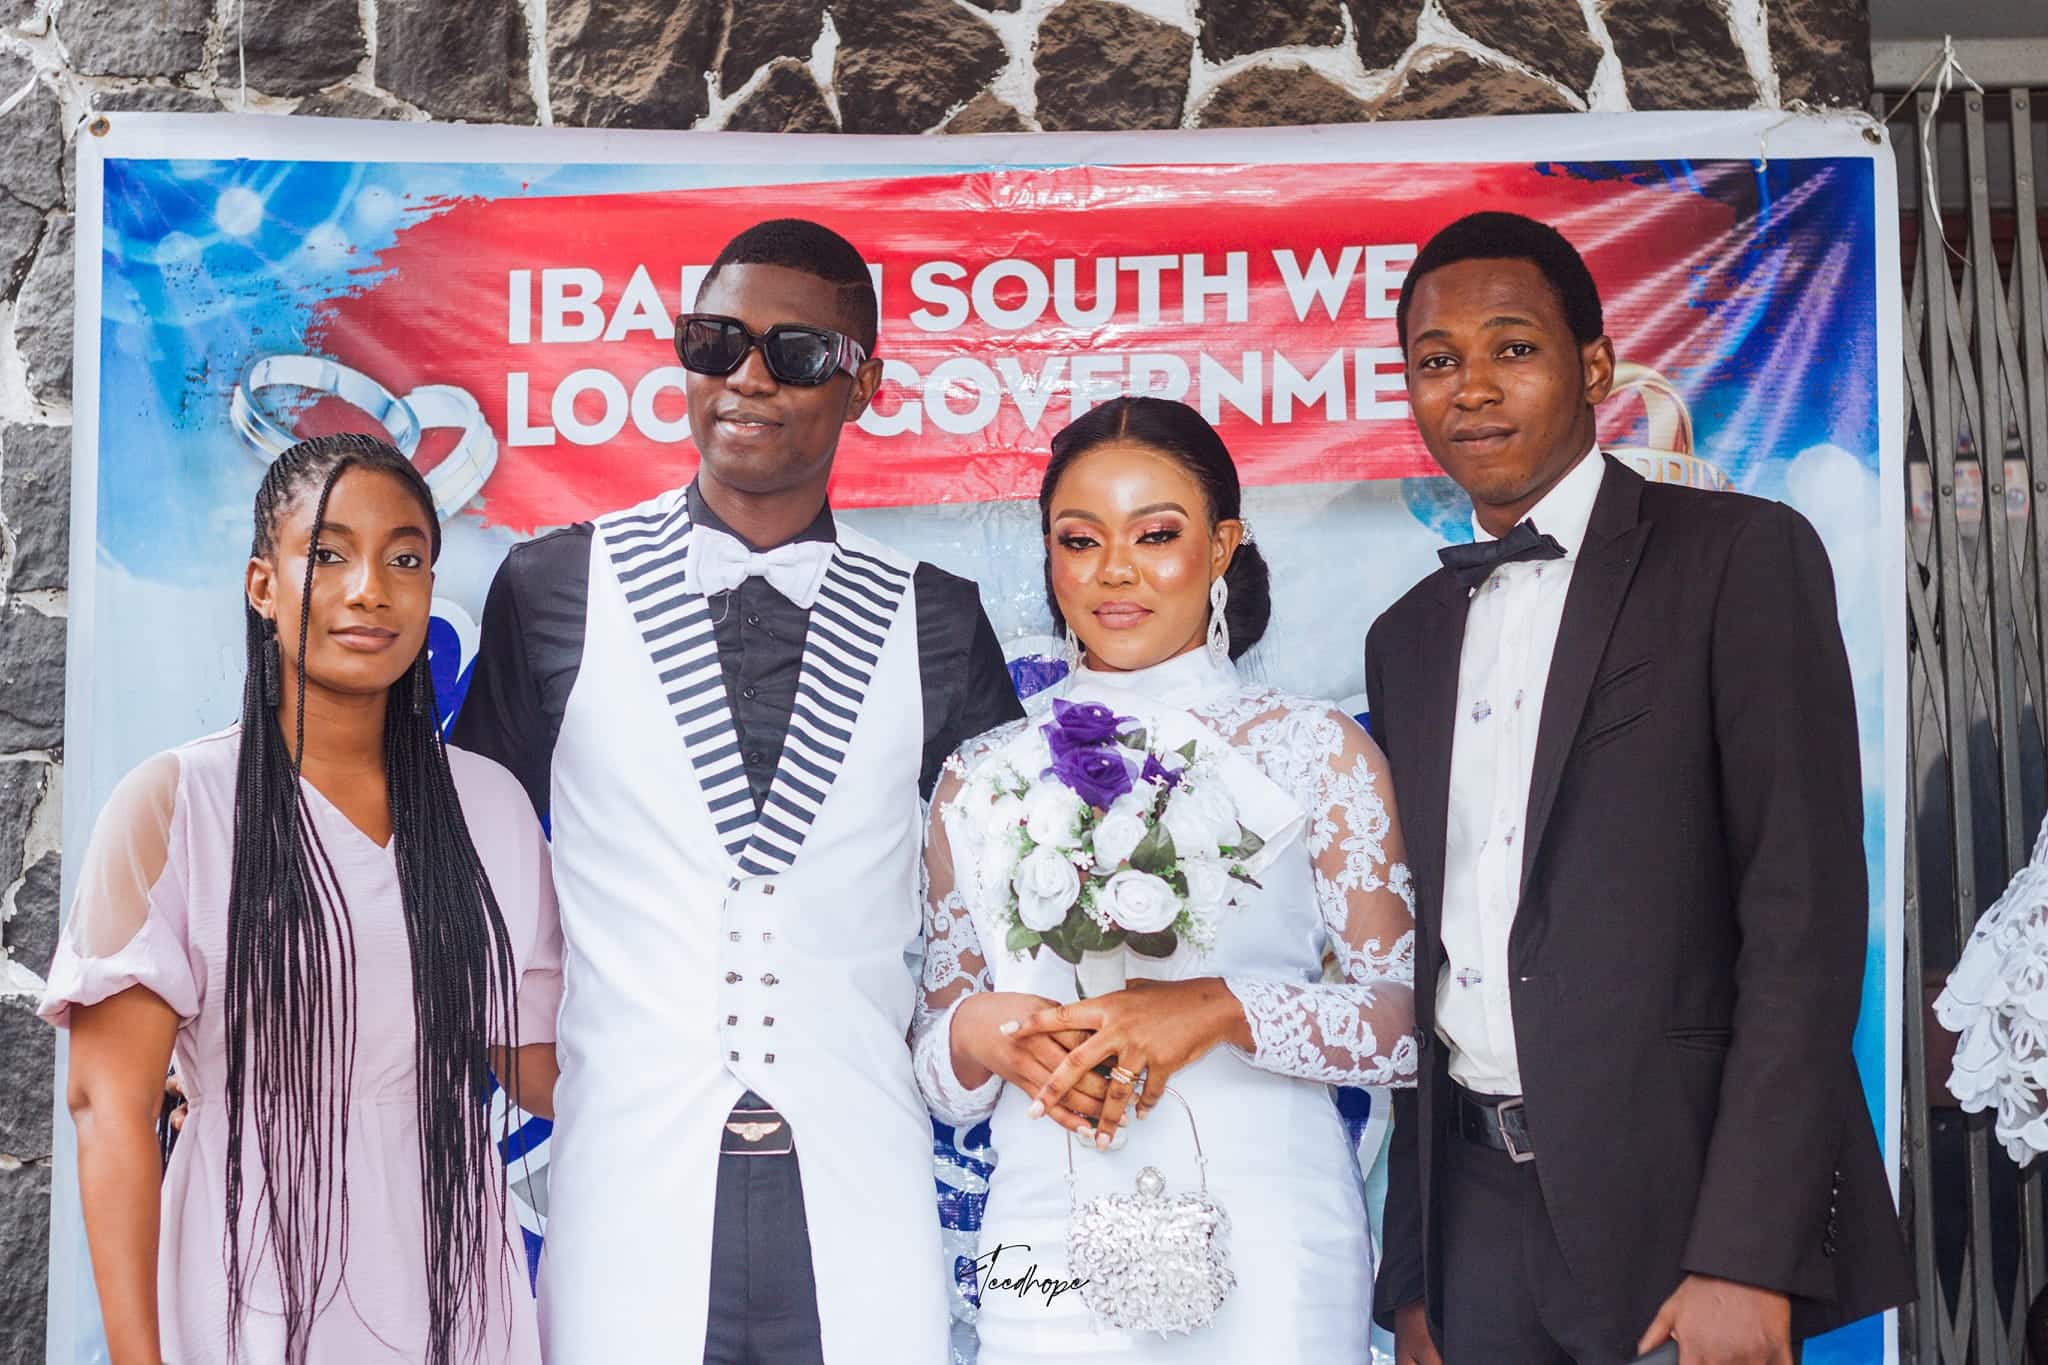 My wife's attraction to me has nothing to do with money, it takes courage to date a blind man - Visually impaired Nigerian man writes after marrying he met on Facebook